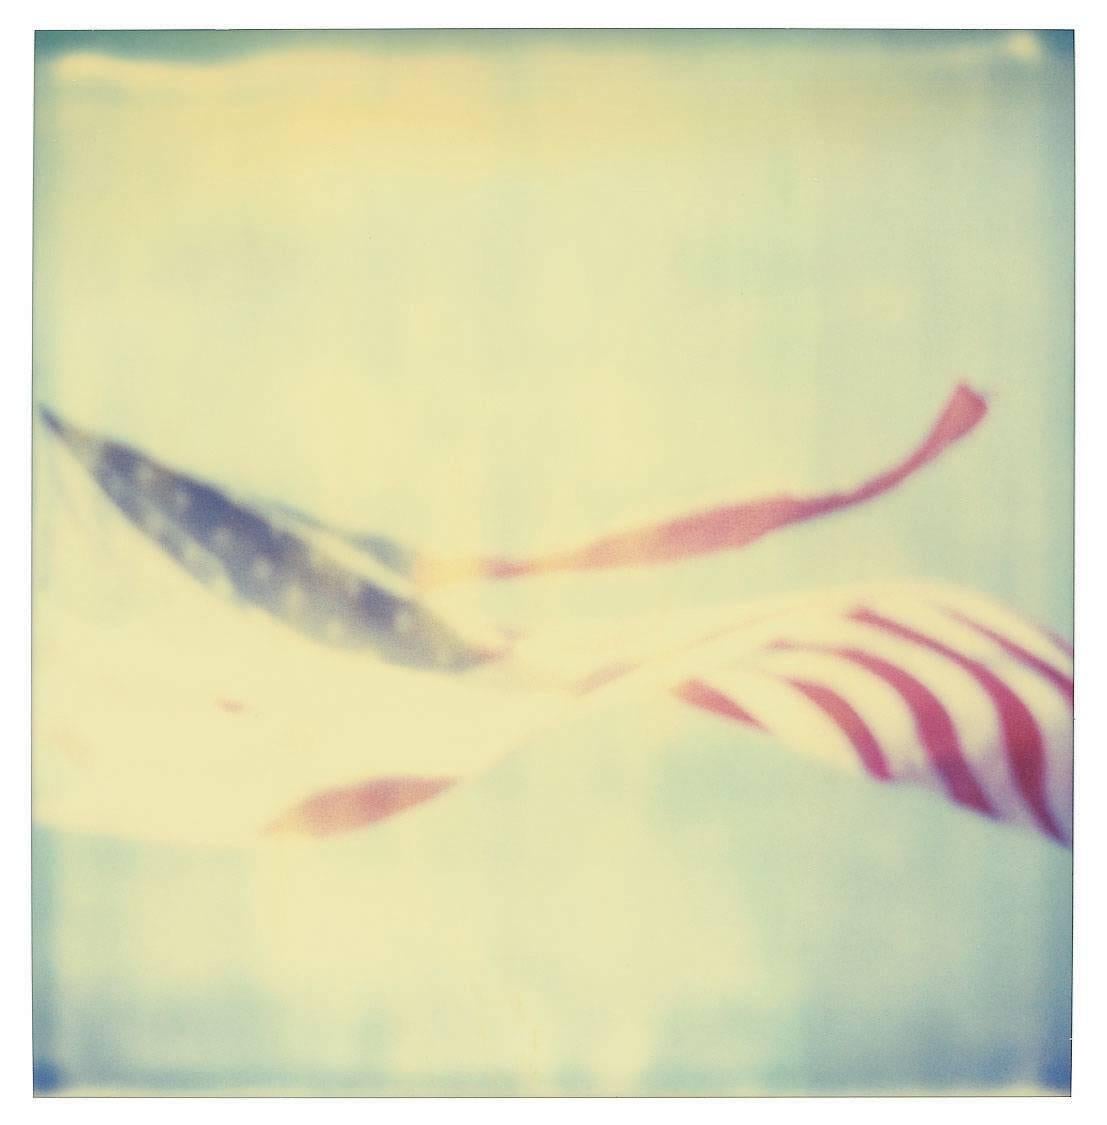 Primary Colors - Contemporary, Figurative, Icons, Polaroid, Photograph, expired For Sale 6